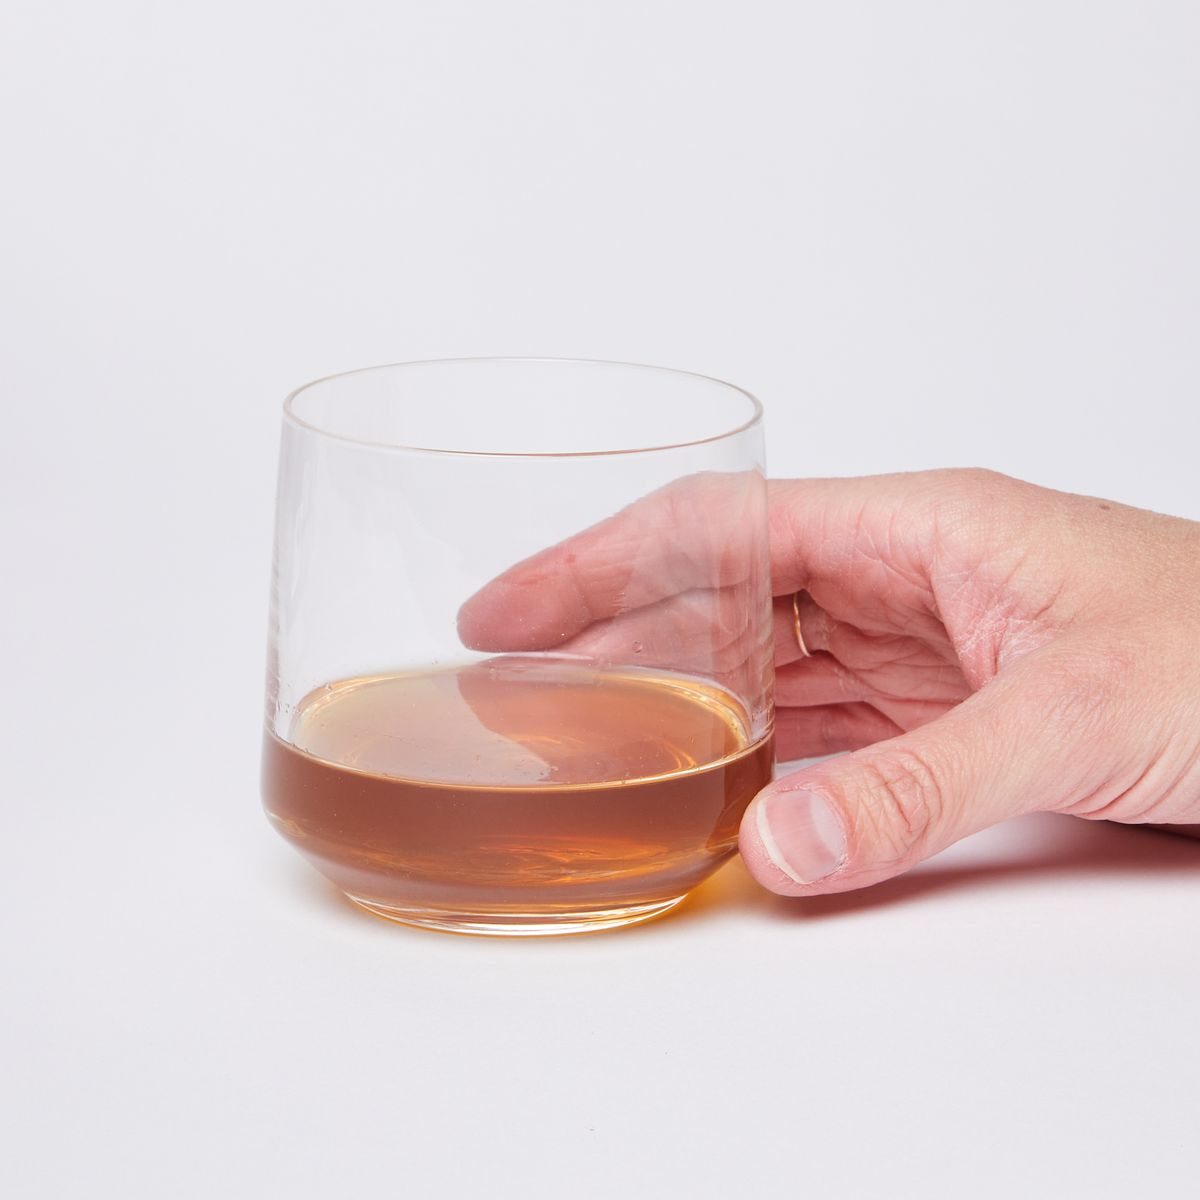 Hand holding a clear glass tumbler with a small pour of brown liquid